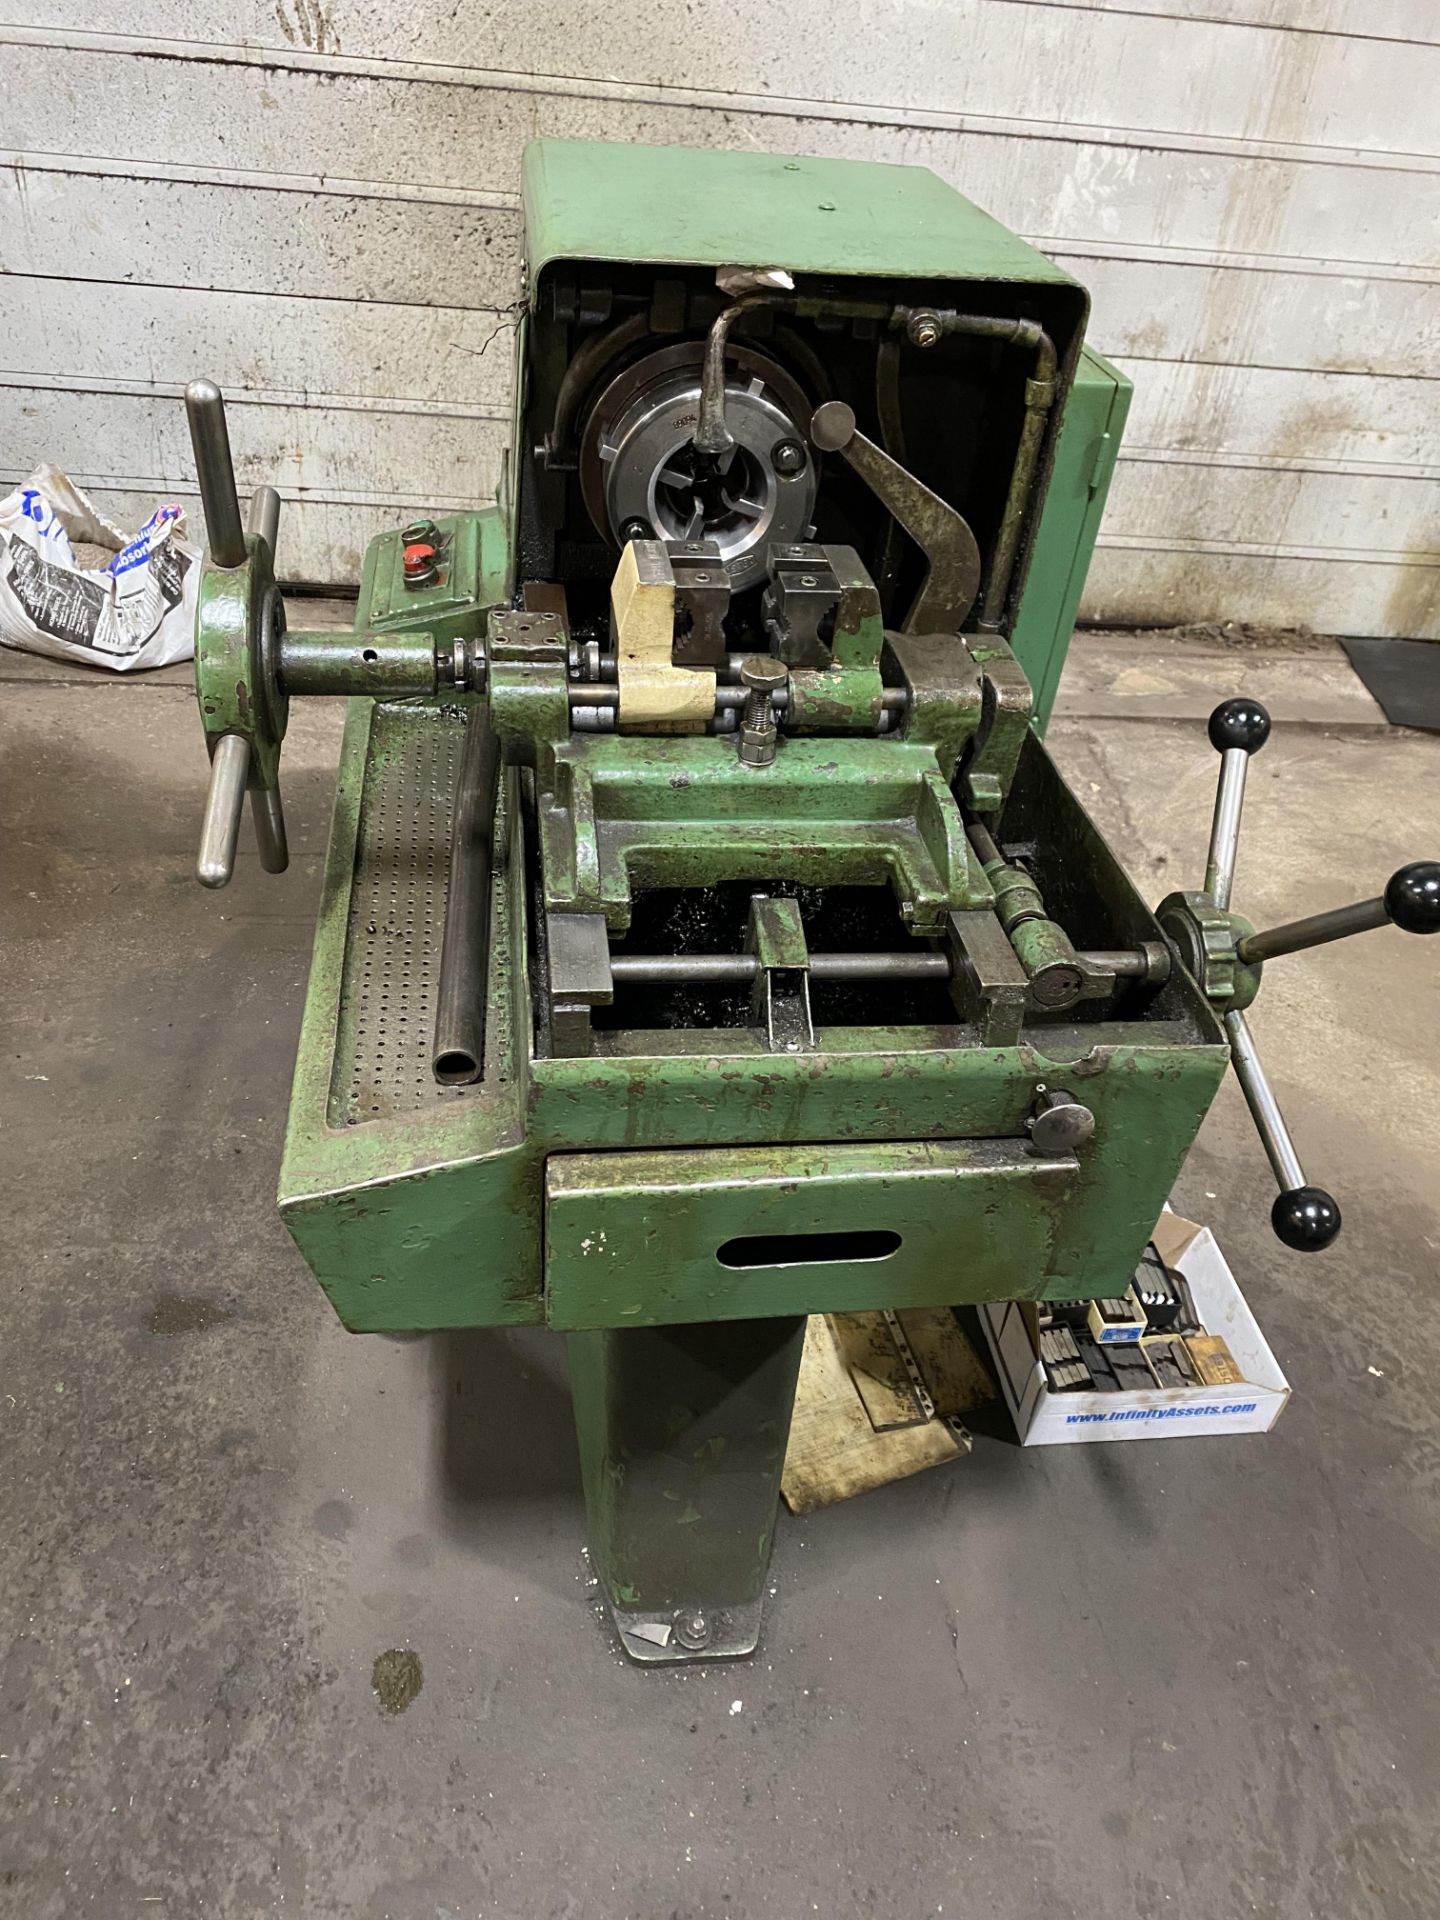 OSTER 792-A THREADING LATHE W/ VISE, TOOLING, DIES, S/N AAT-123 (RIGGING FEE $250) - Image 2 of 4